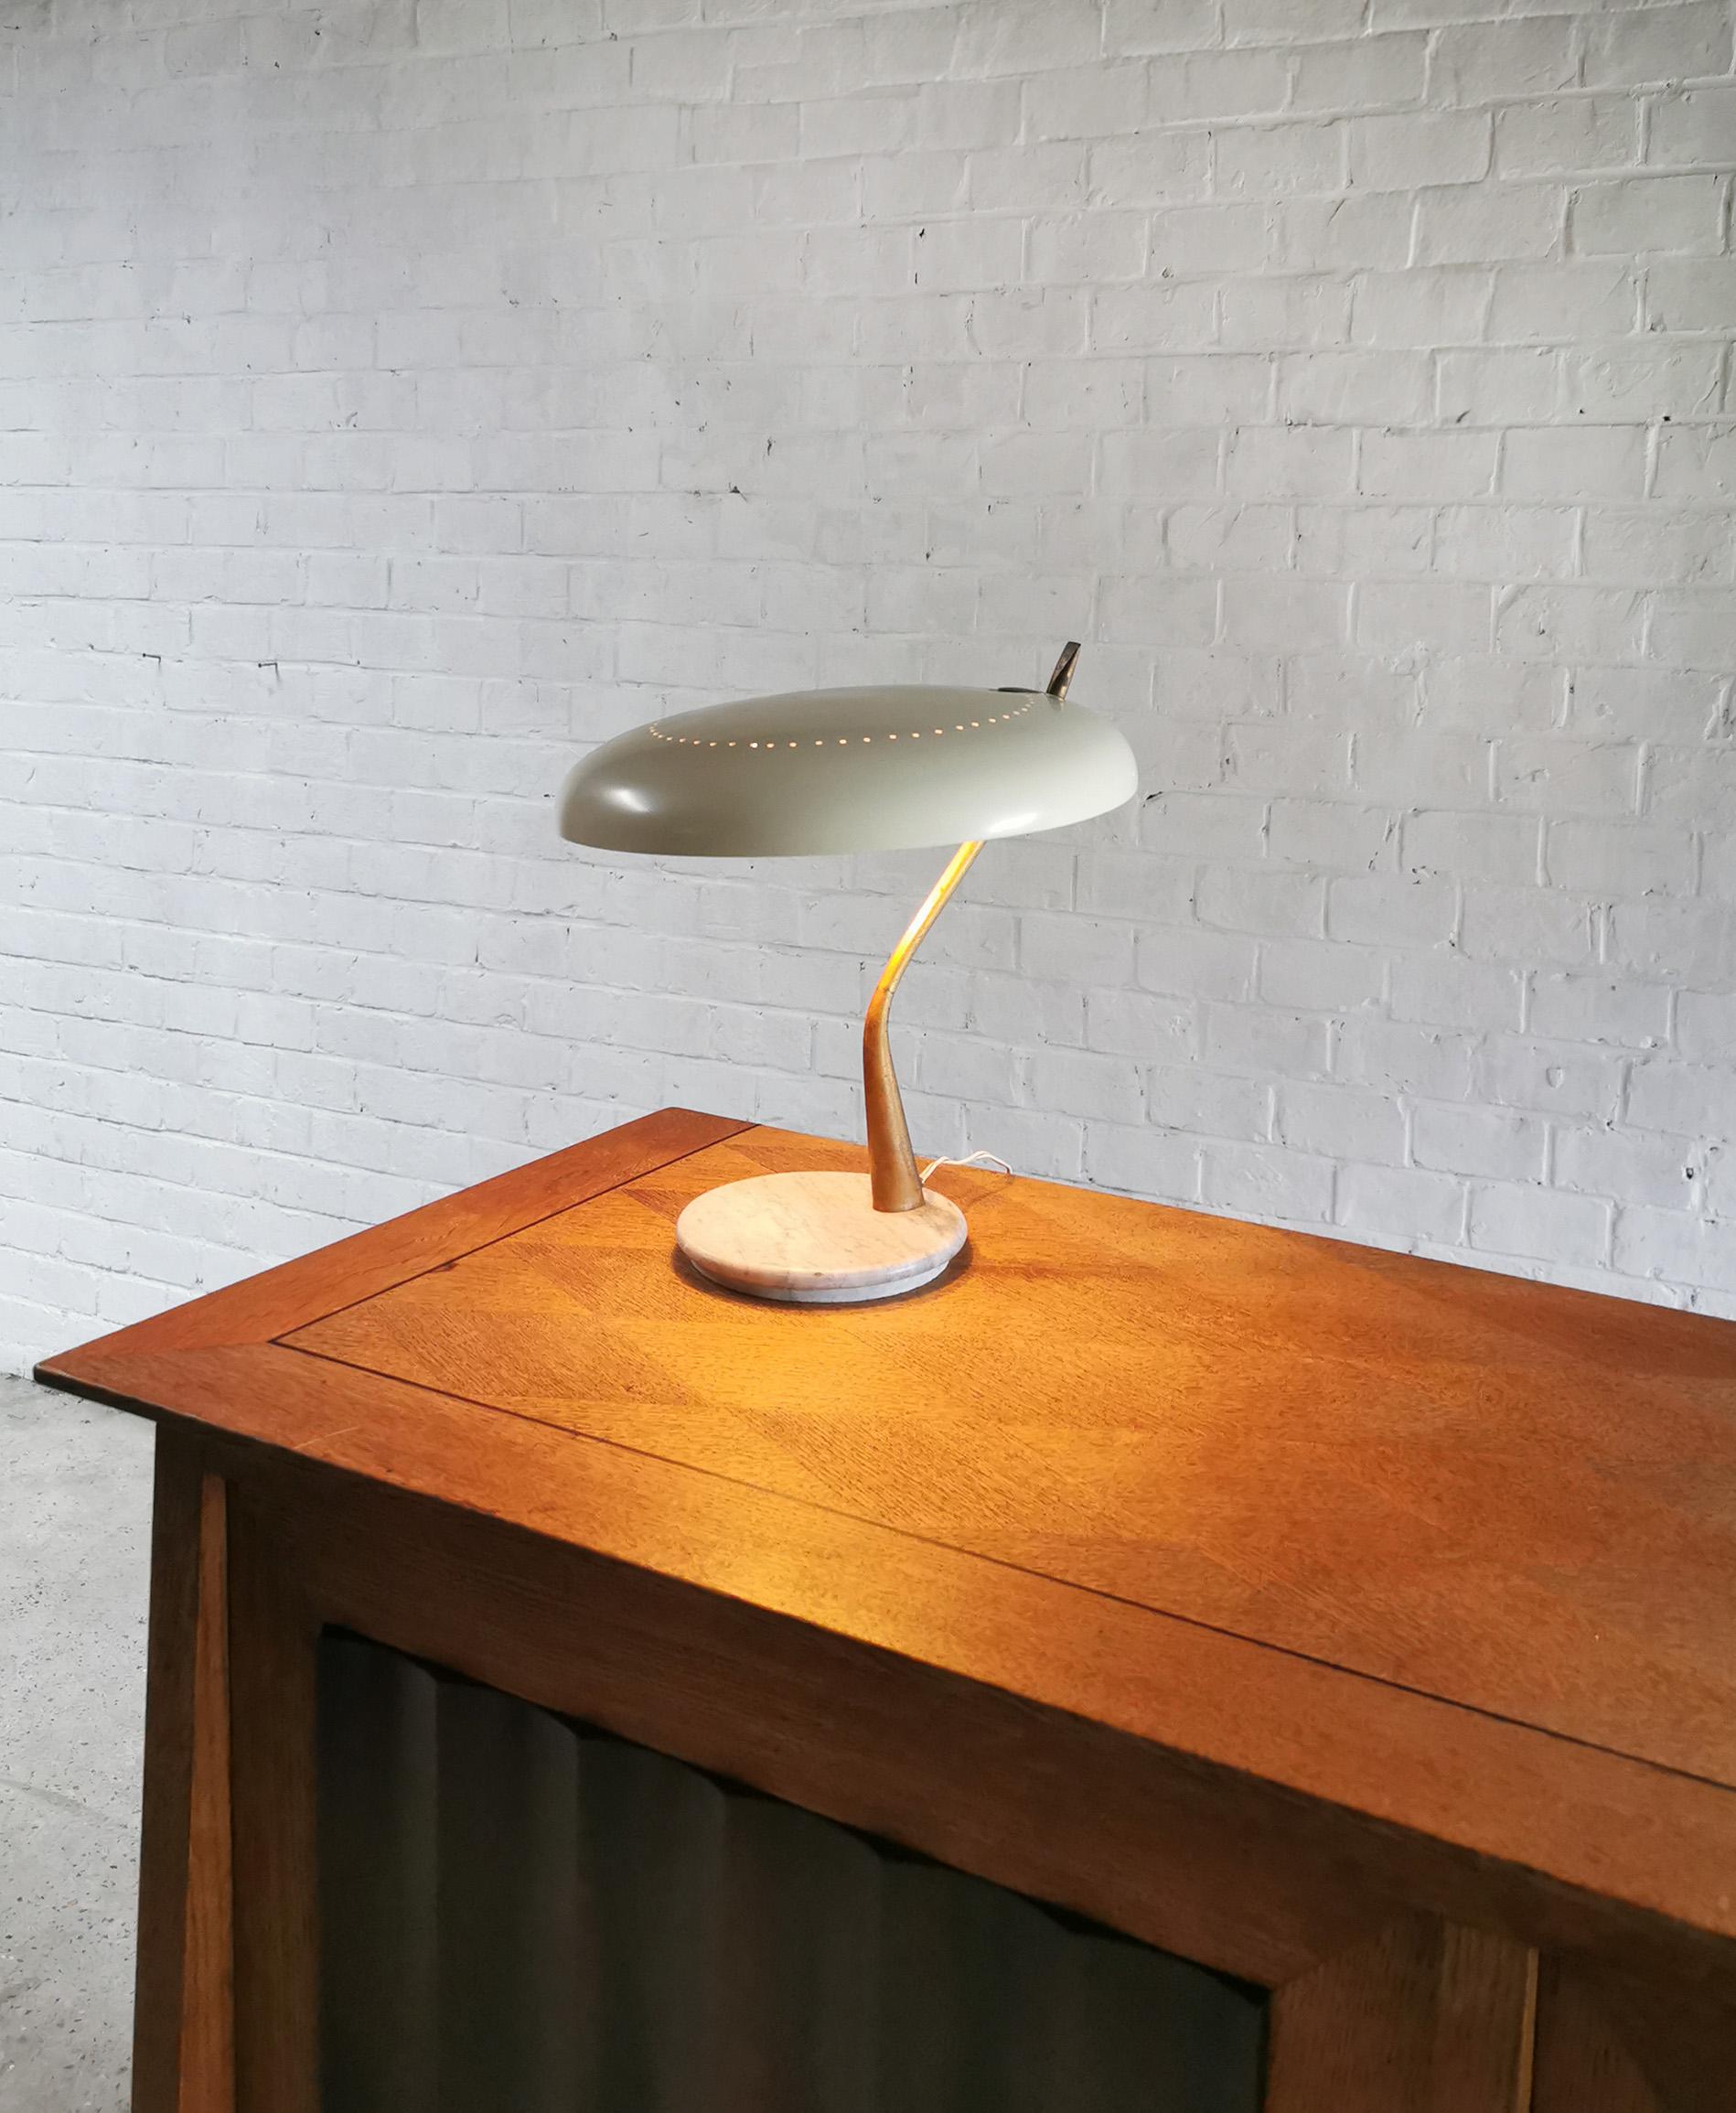 Beautiful Italian desk or table Lamp by Lumen Milano, 1950's. This lamp features a round adjustable perforated lampshade that is connected on a sculptural bent brass stem. The base is made out of round shaped carrara marble.

Fully functional, ready